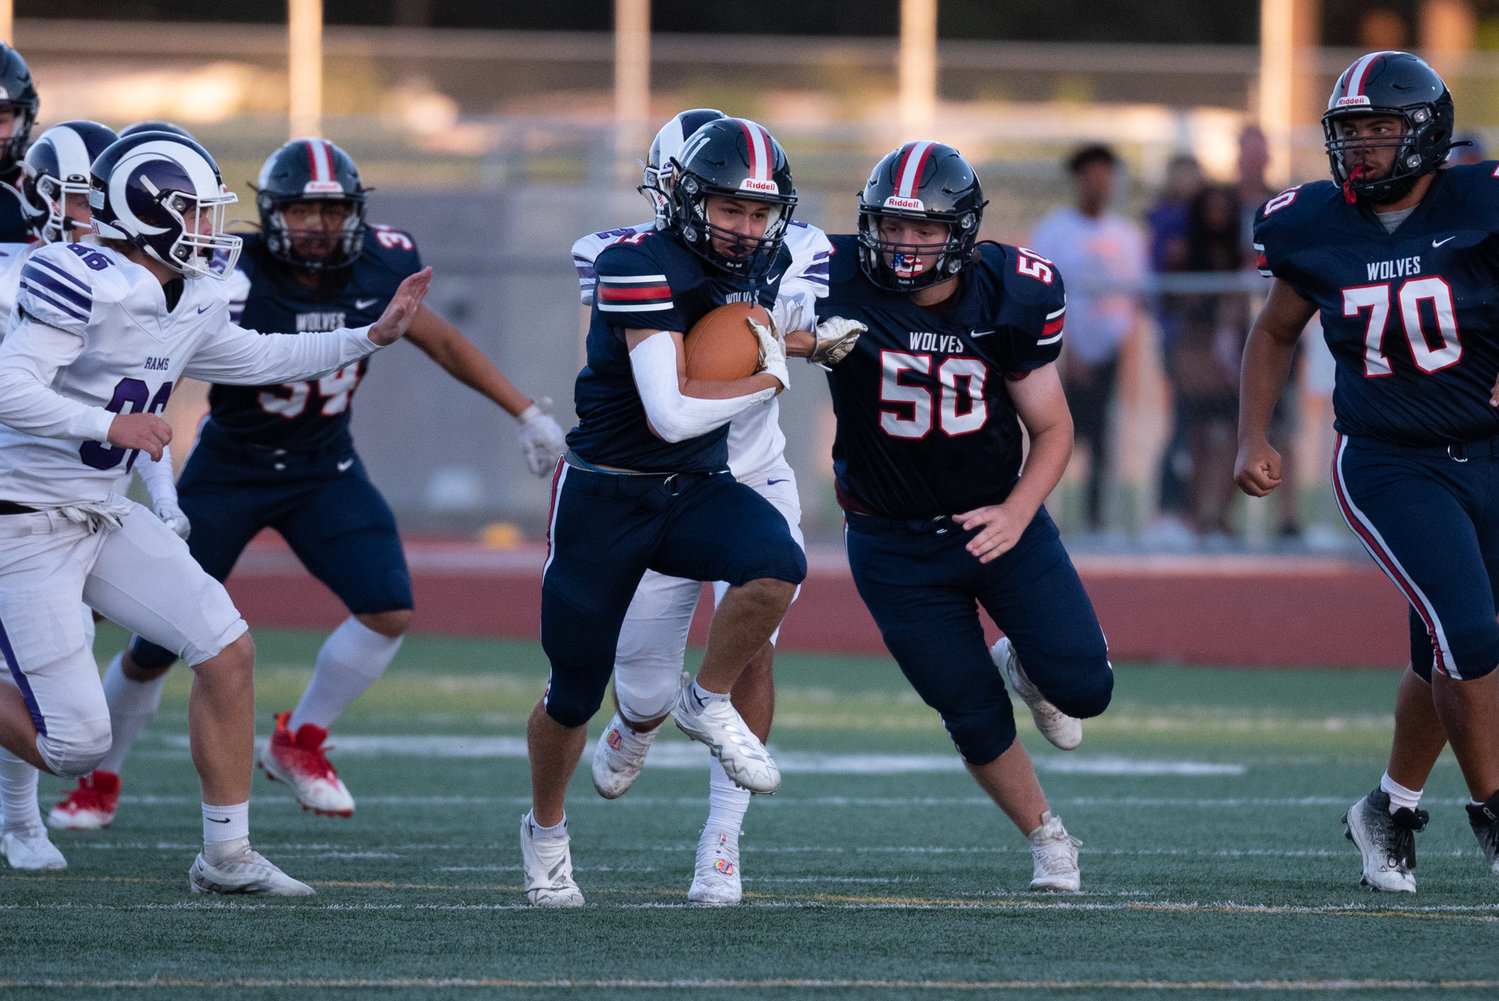 Bronson Campbell bursts through the hole en route to a touchdown on the opening kickoff of the game in Blach Hills' 15-0 win over North Thurston at South Sound Stadium on Sept. 8.